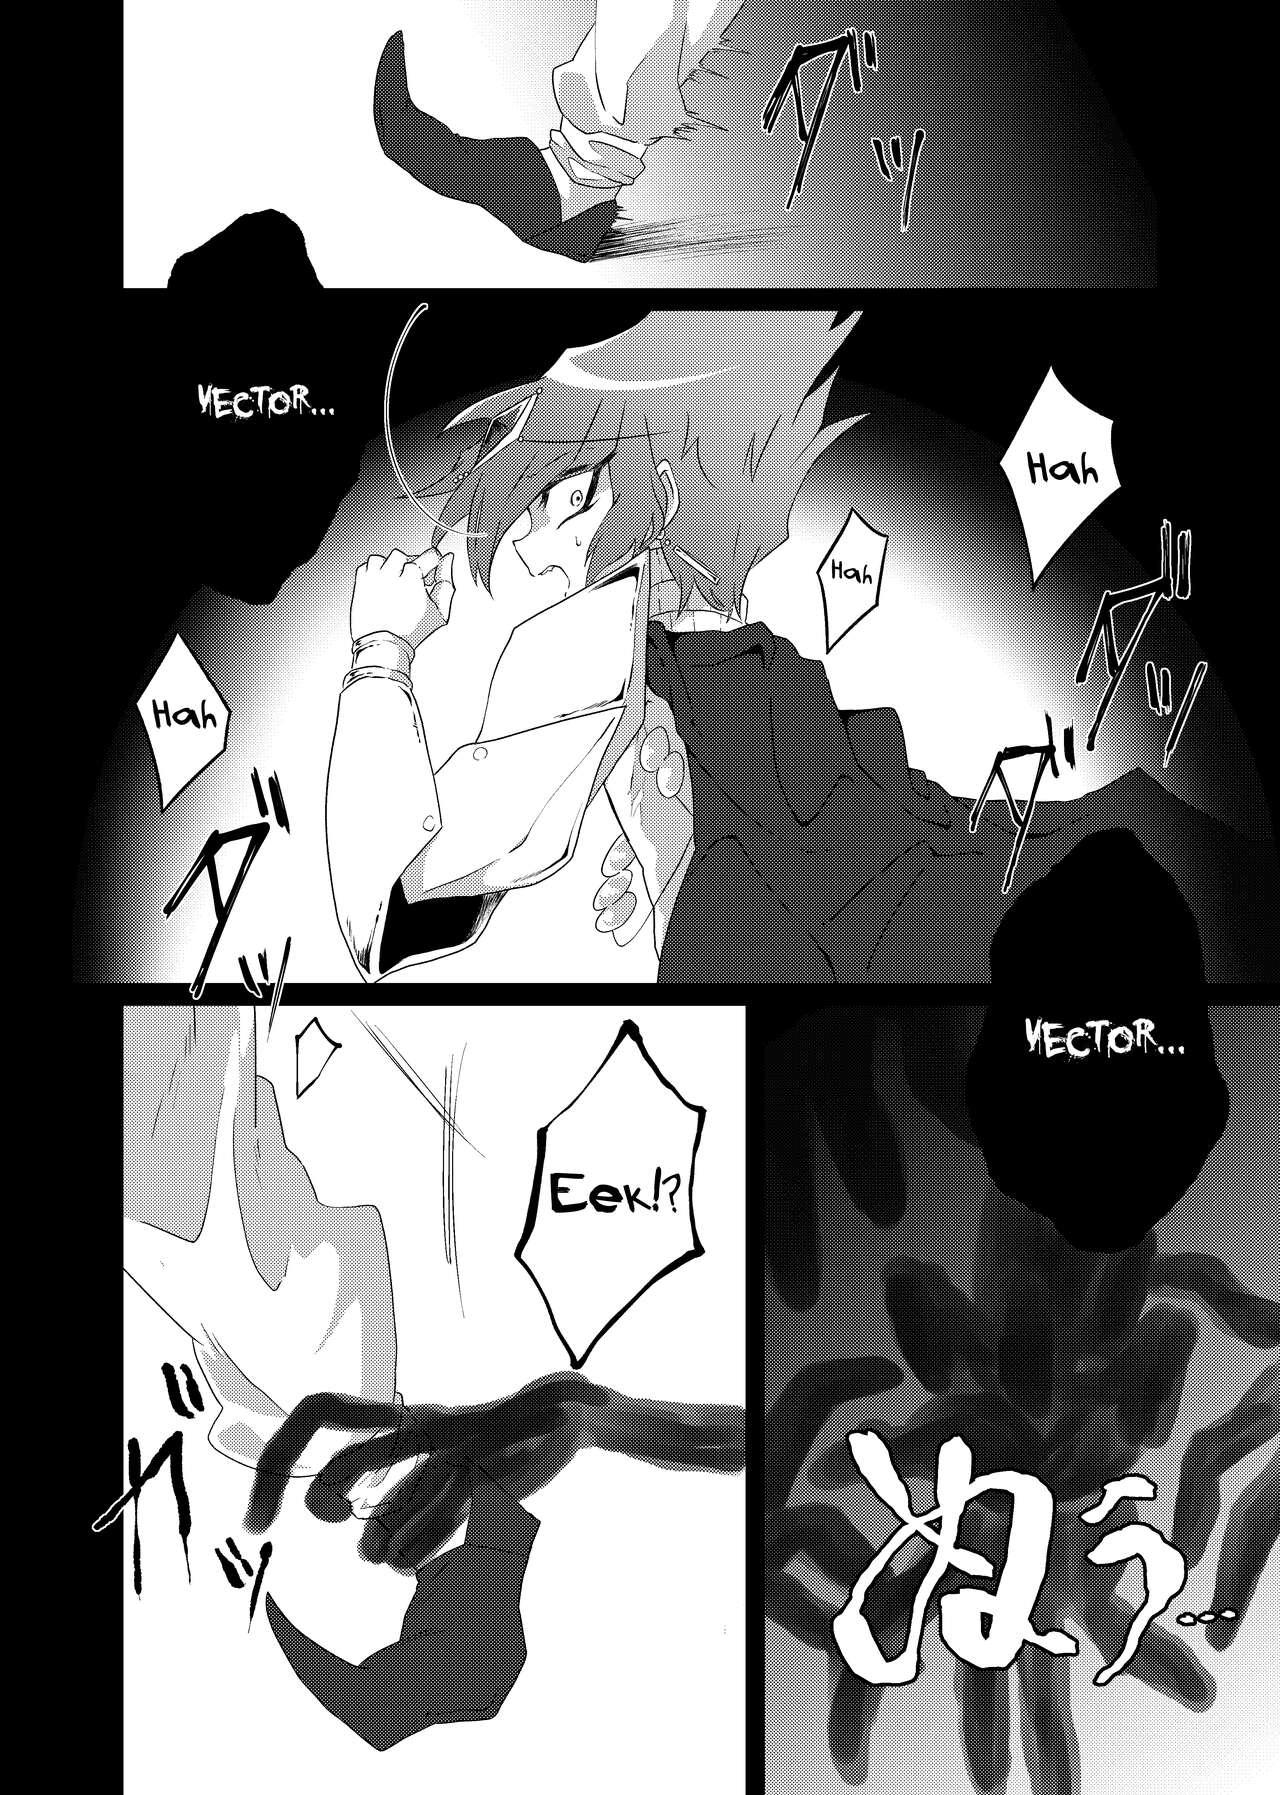 Jerking Off REINCARNATION NIGHTMARE - Yu gi oh zexal Real Amateur - Page 2